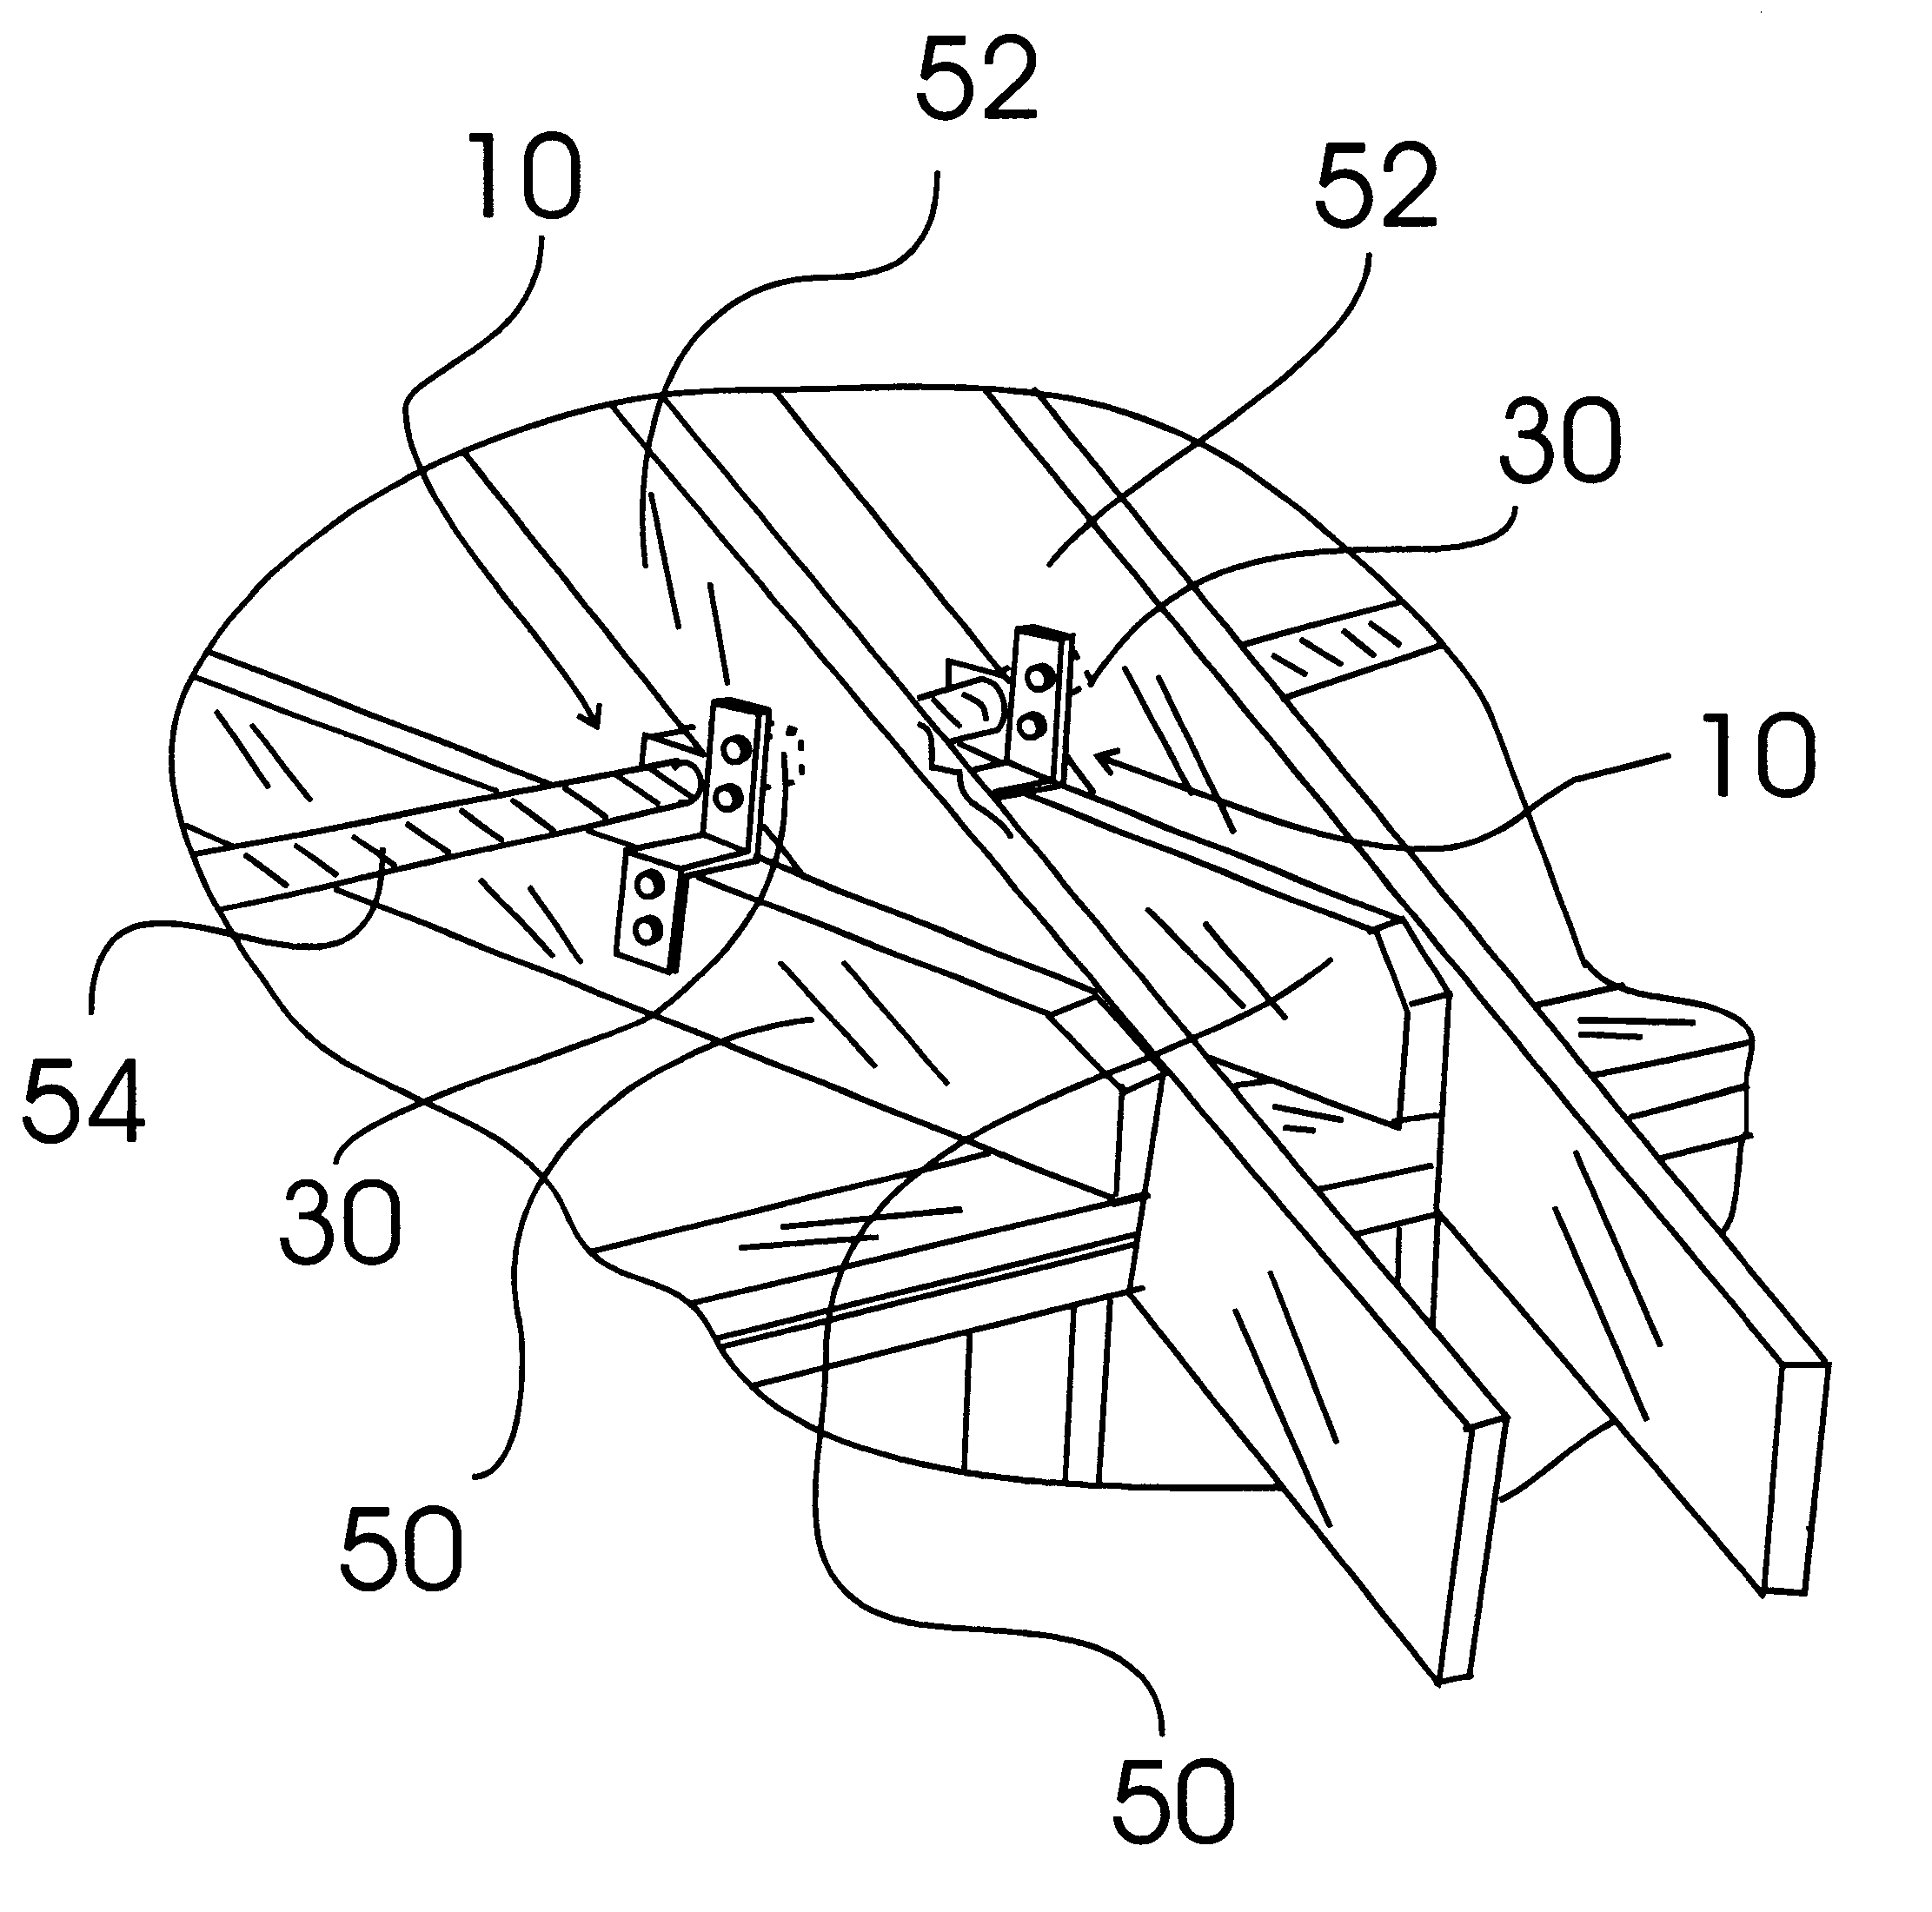 Structure stabilizing system and method